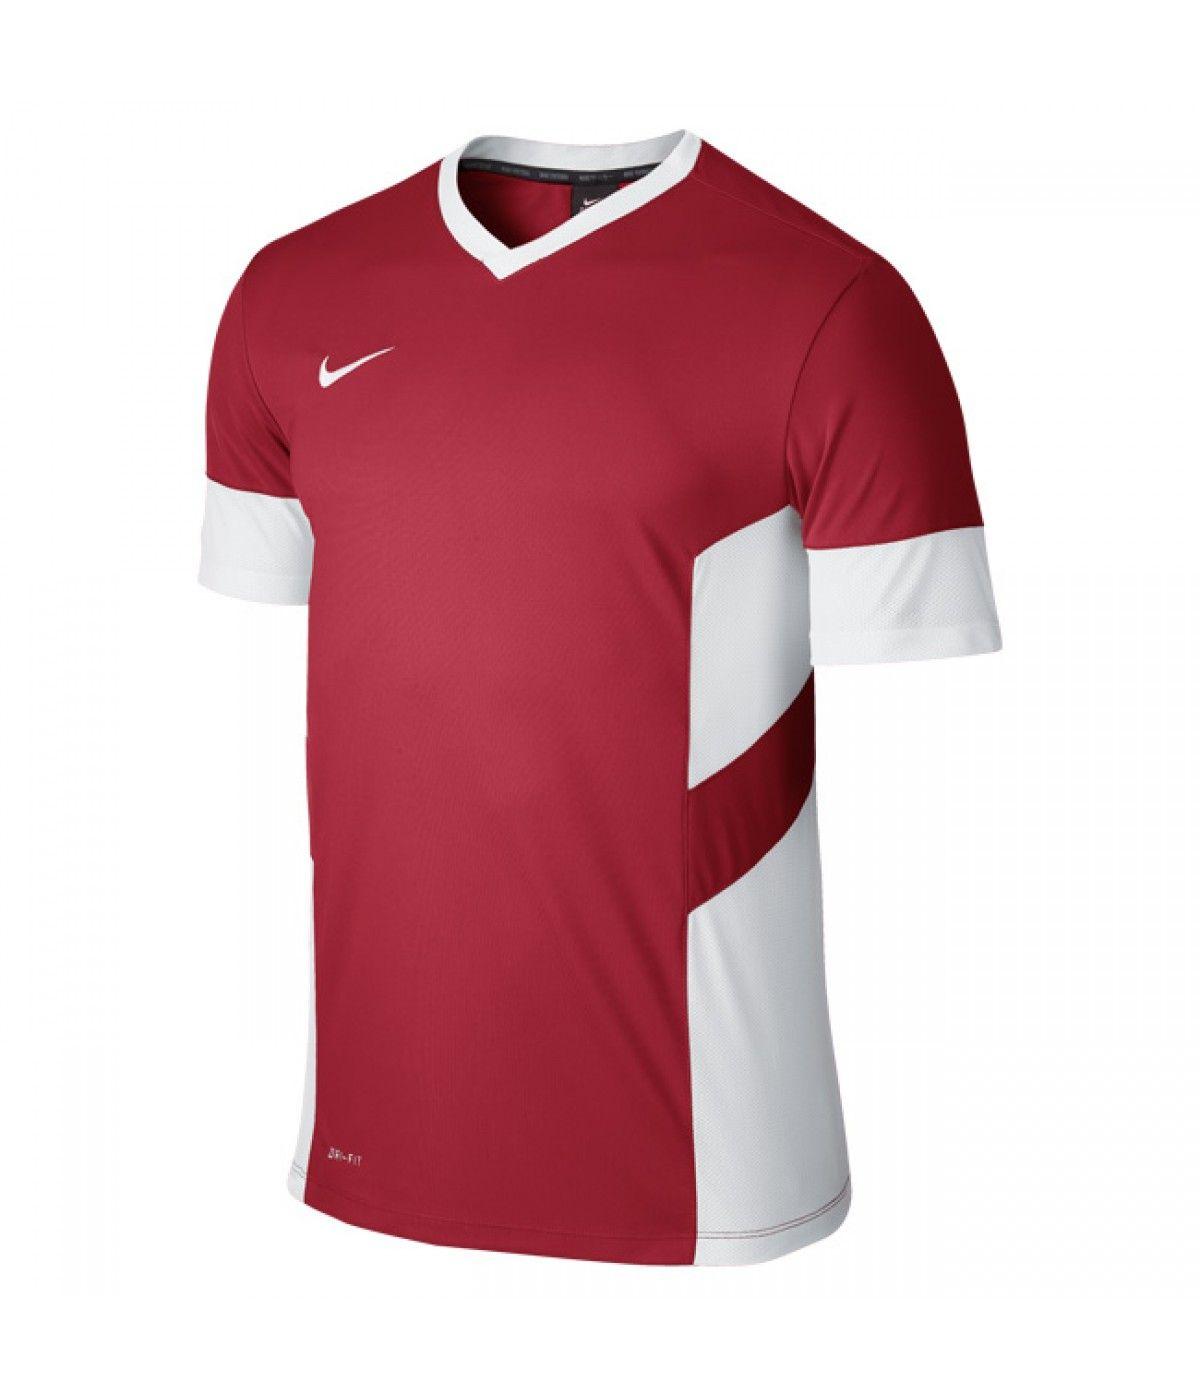 Red and White College Logo - Middlesbrough College Nike Academy 14 Training Top University Red